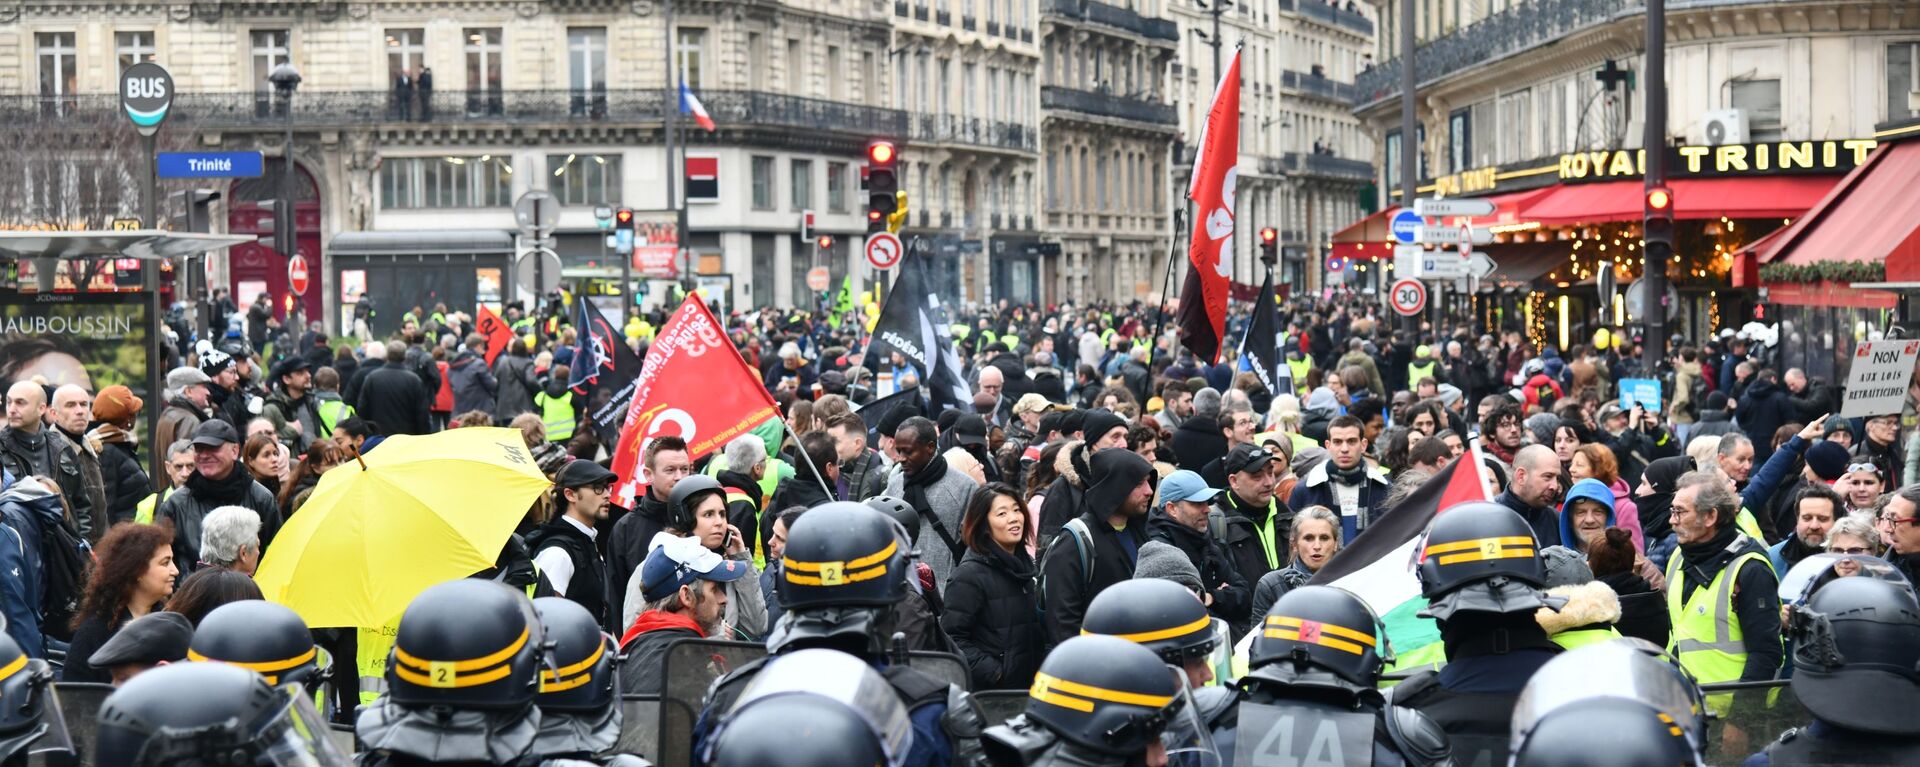 Protesters face off with CRS riot police during a demonstration as part of the 36th consecutive day of strike against French government's pensions reform plans, in Paris, France. - Sputnik International, 1920, 10.01.2020